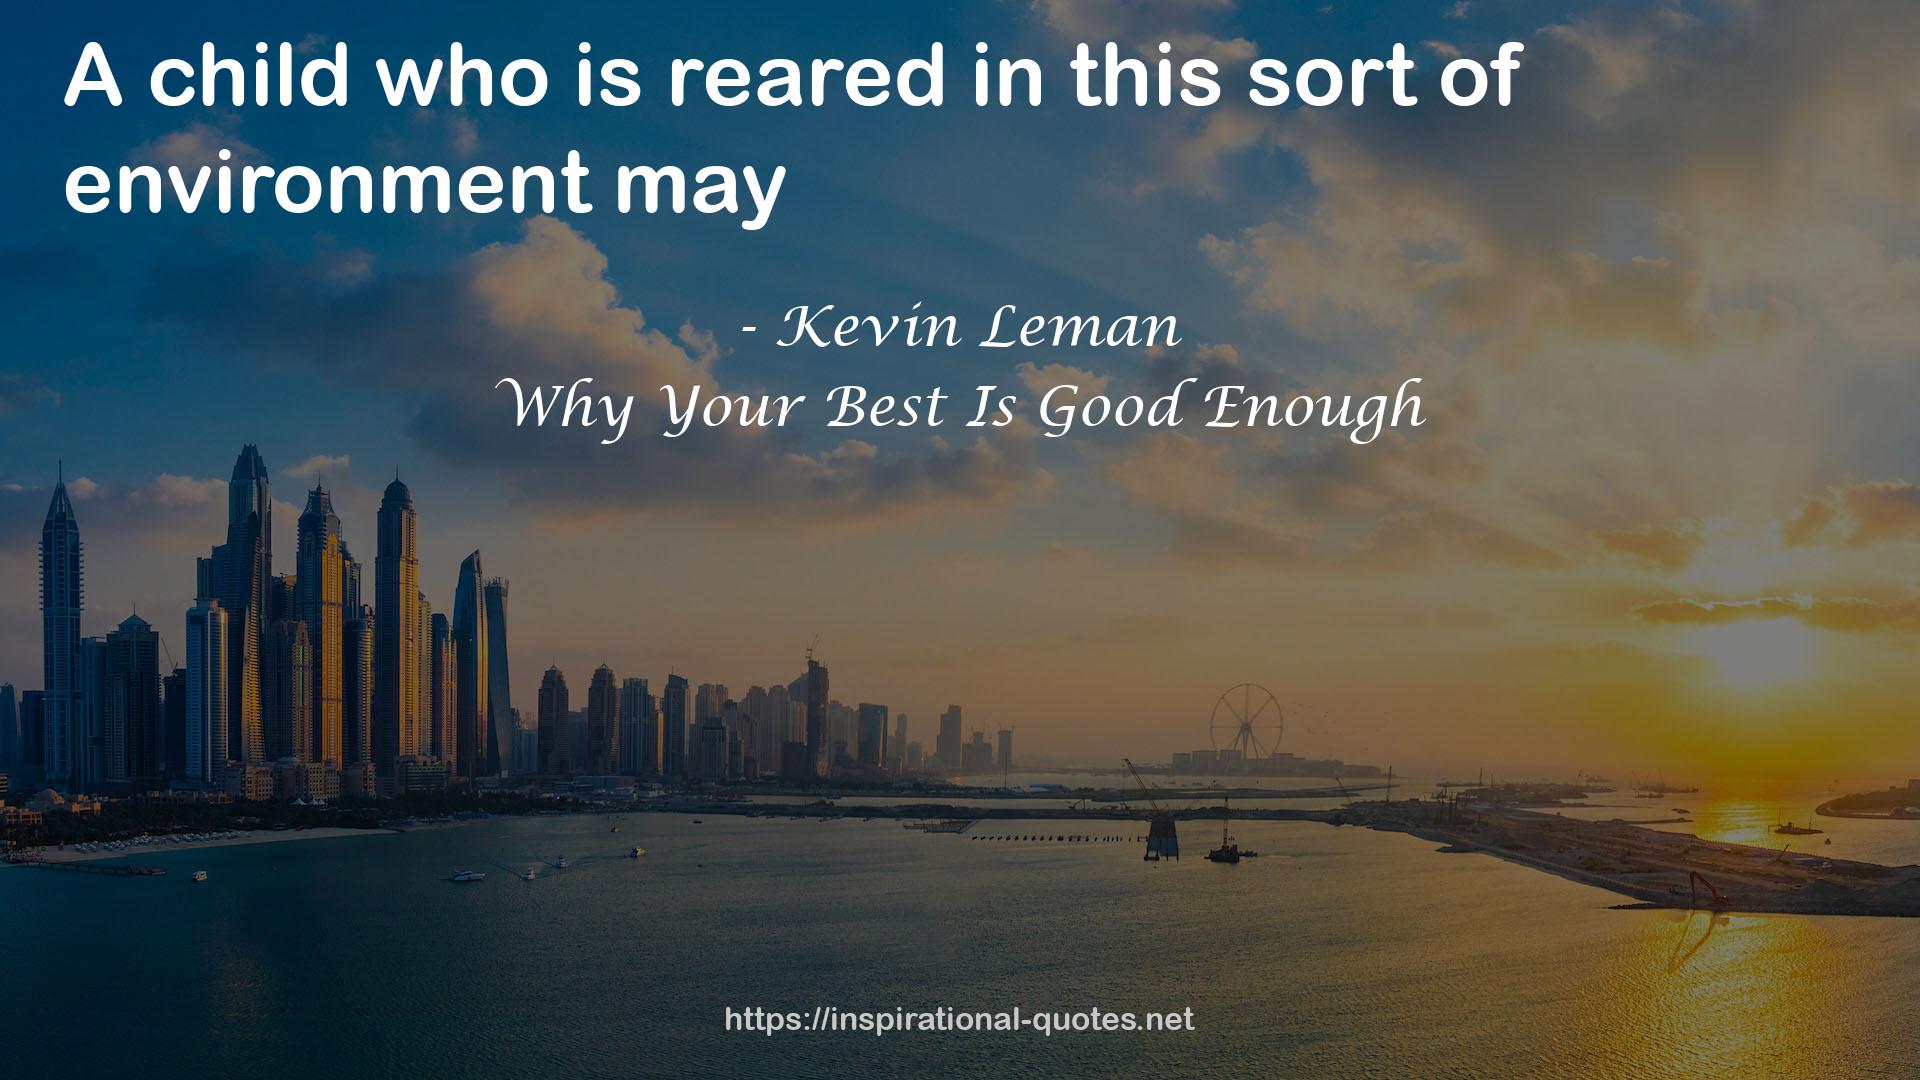 Why Your Best Is Good Enough QUOTES